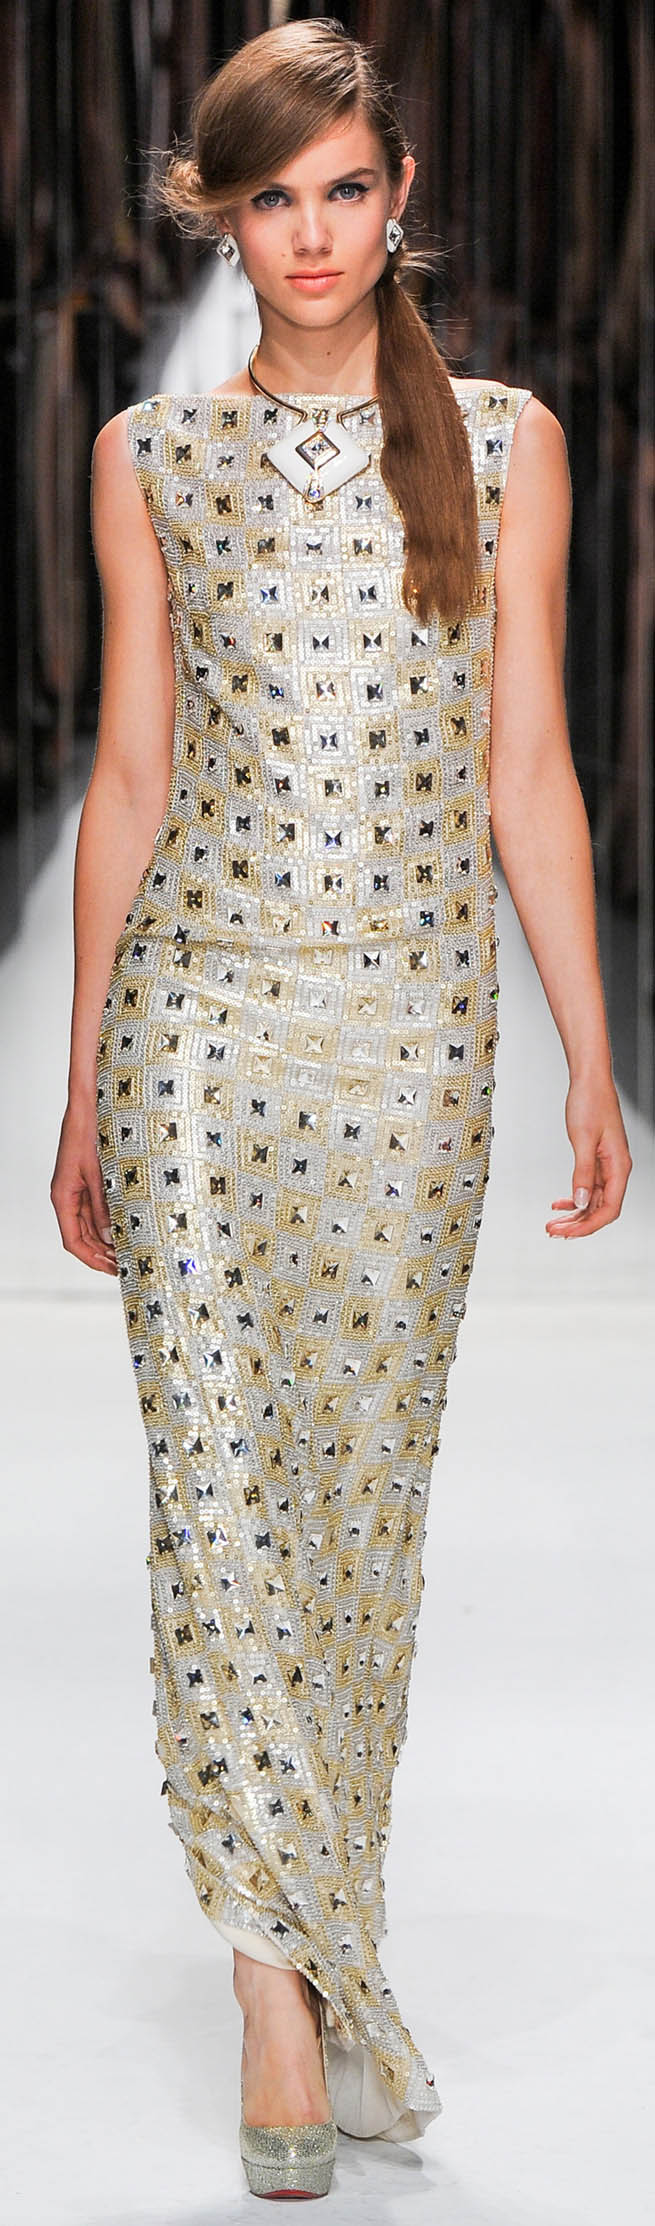 Jenny Packham Spring Summer 2013 Ready To Wear Collection